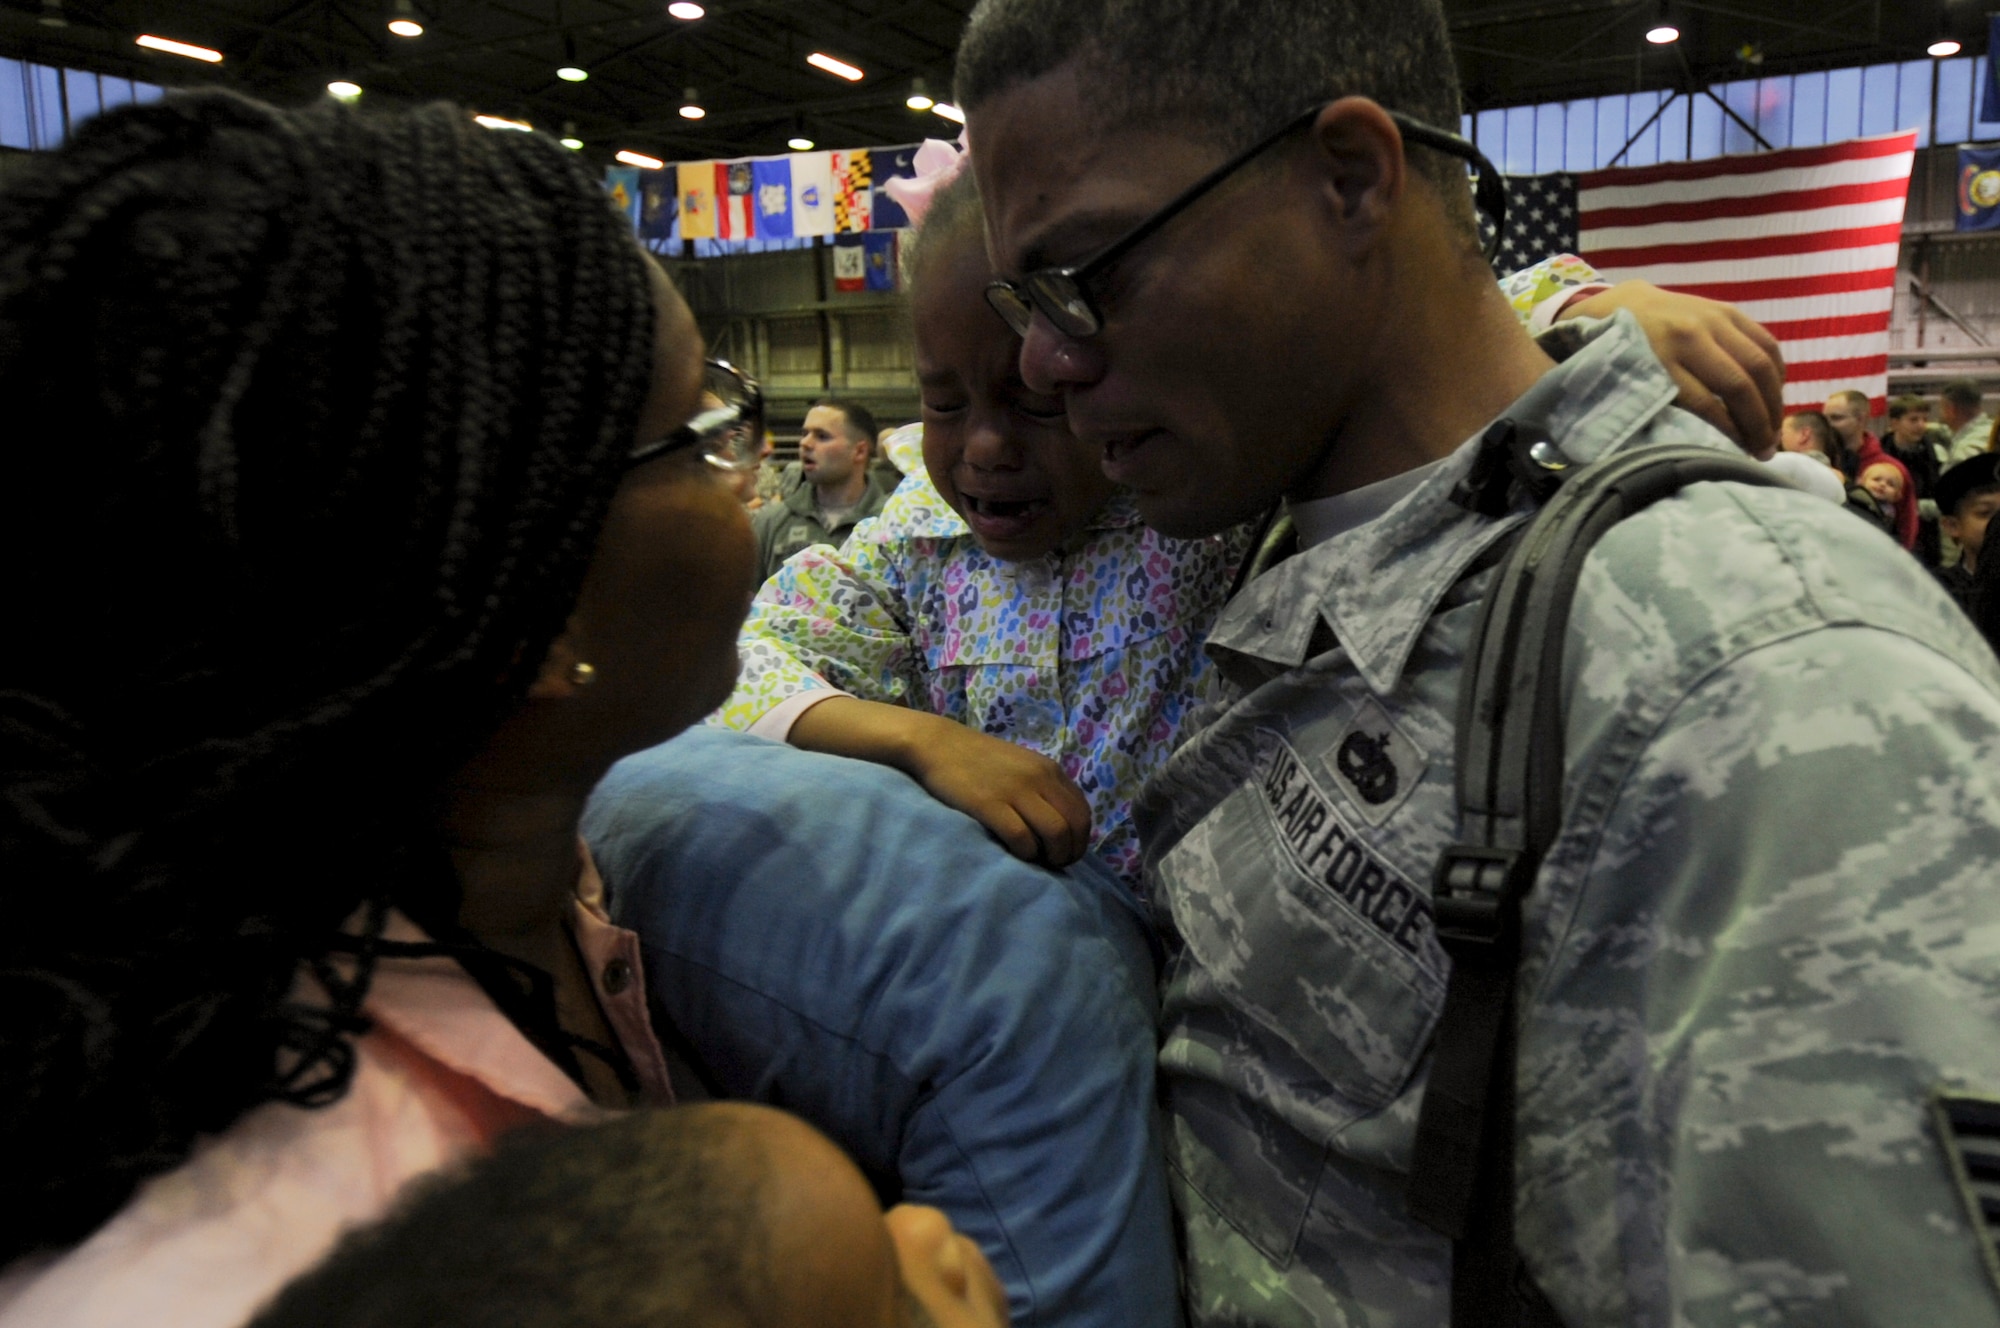 An Airman assigned to the 480th Expeditionary Fighter Squadron reunites with his family during the squadron’s return to Spangdahlem Air Base, Germany, Oct. 12, 2016. Approximately 300 of the Airmen, who serve in flight, maintenance or support roles for the F-16 Fighting Falcon fighter aircraft, completed a six-month deployment to Southwest Asia by providing close air support and dynamic targeting operations as part of the squadron’s first deployment in support of Operation Inherent Resolve. Operation Inherent Resolve aims to eliminate the Da'esh terrorist group and the threat they pose to Iraq, Syria and the wider international community. (U.S. Air Force photo by Staff Sgt. Joe W. McFadden)